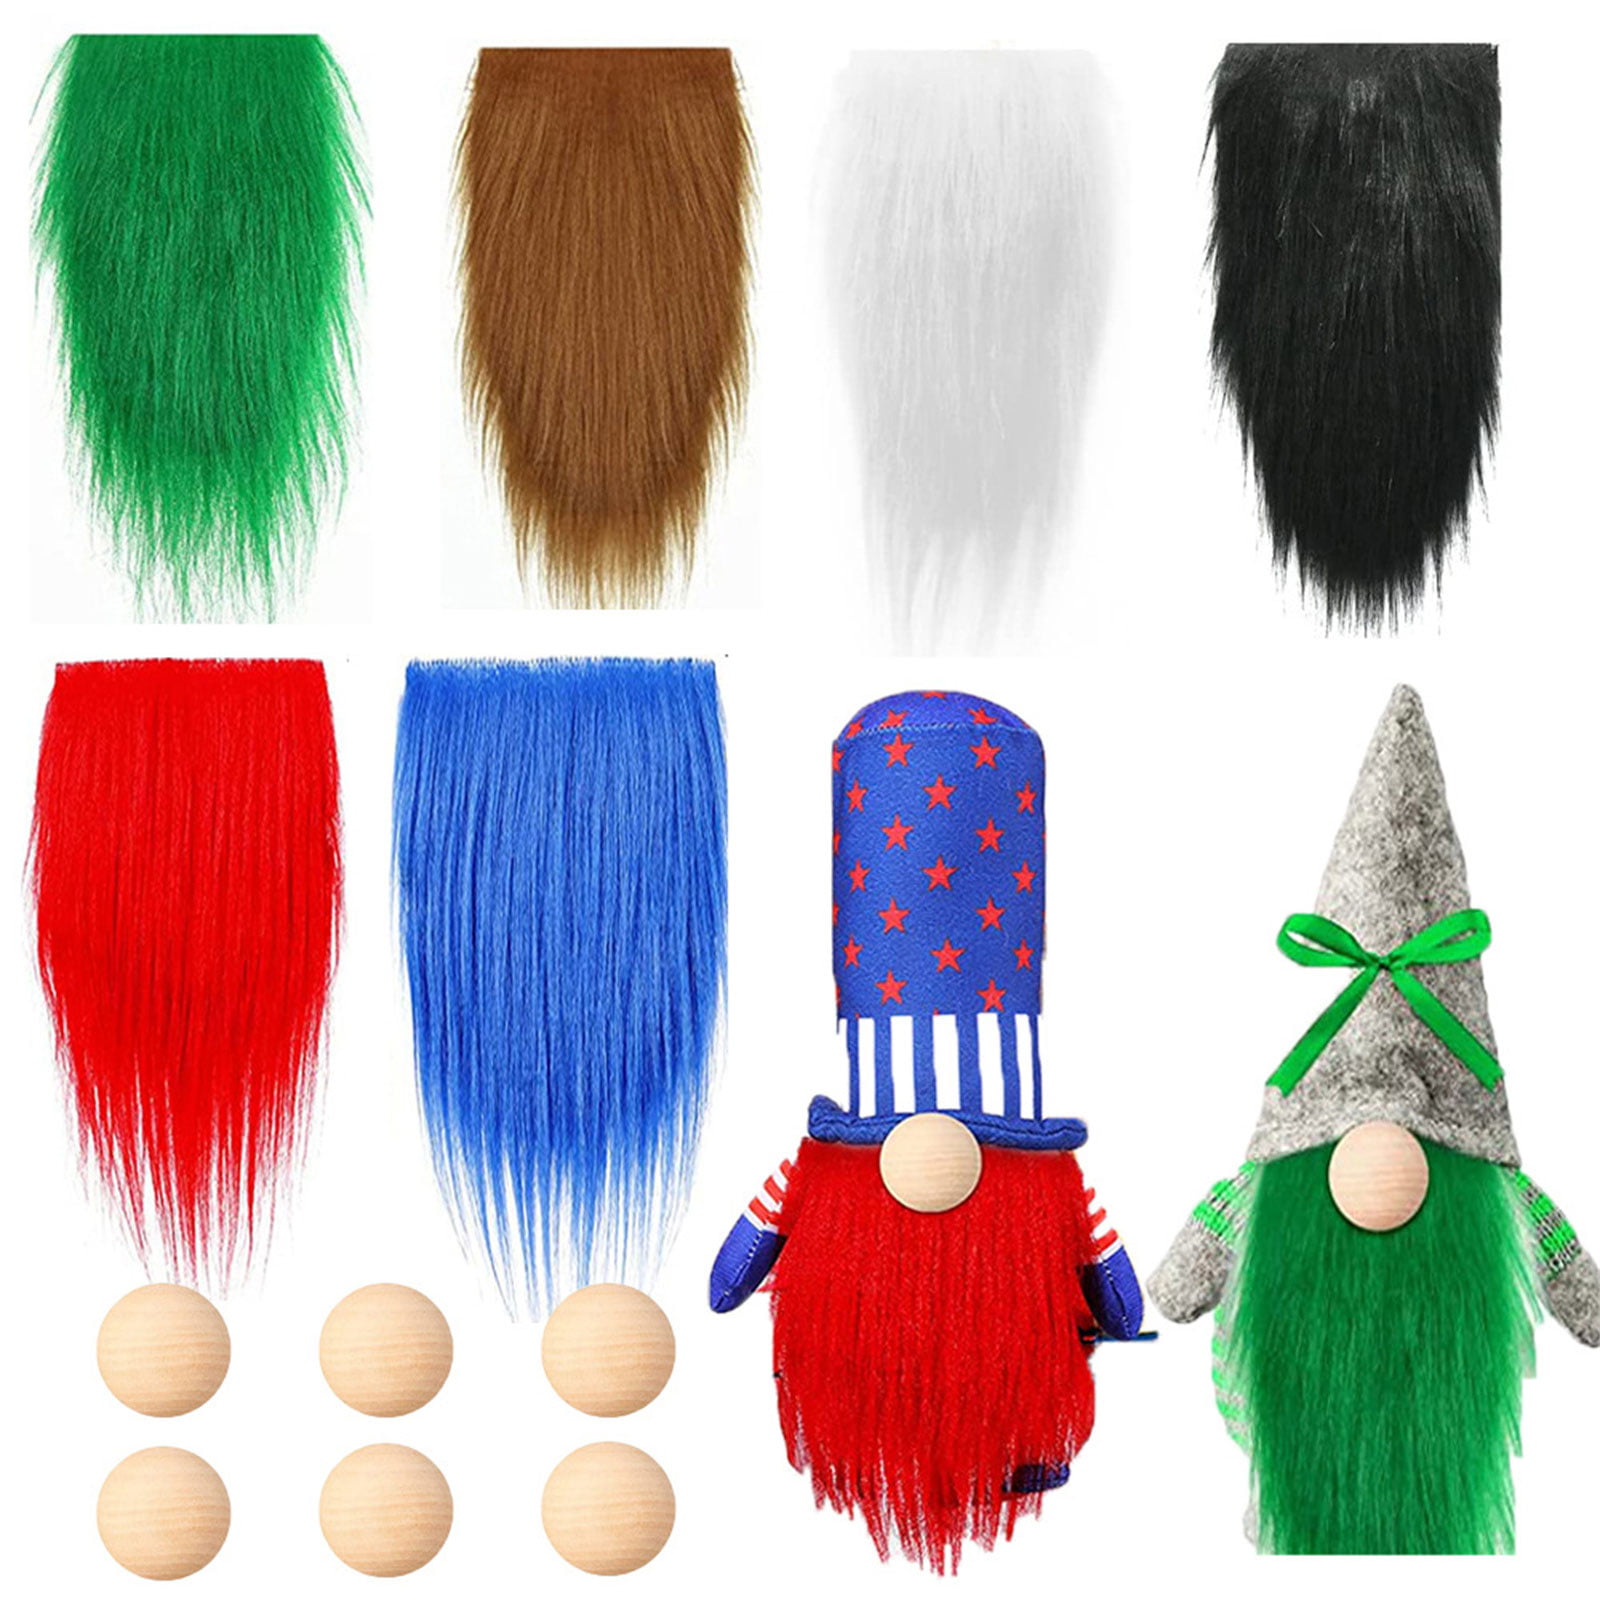 TINYSOME Gnome Beards for Crafting Set Includes 2 pcs Gnome Beard